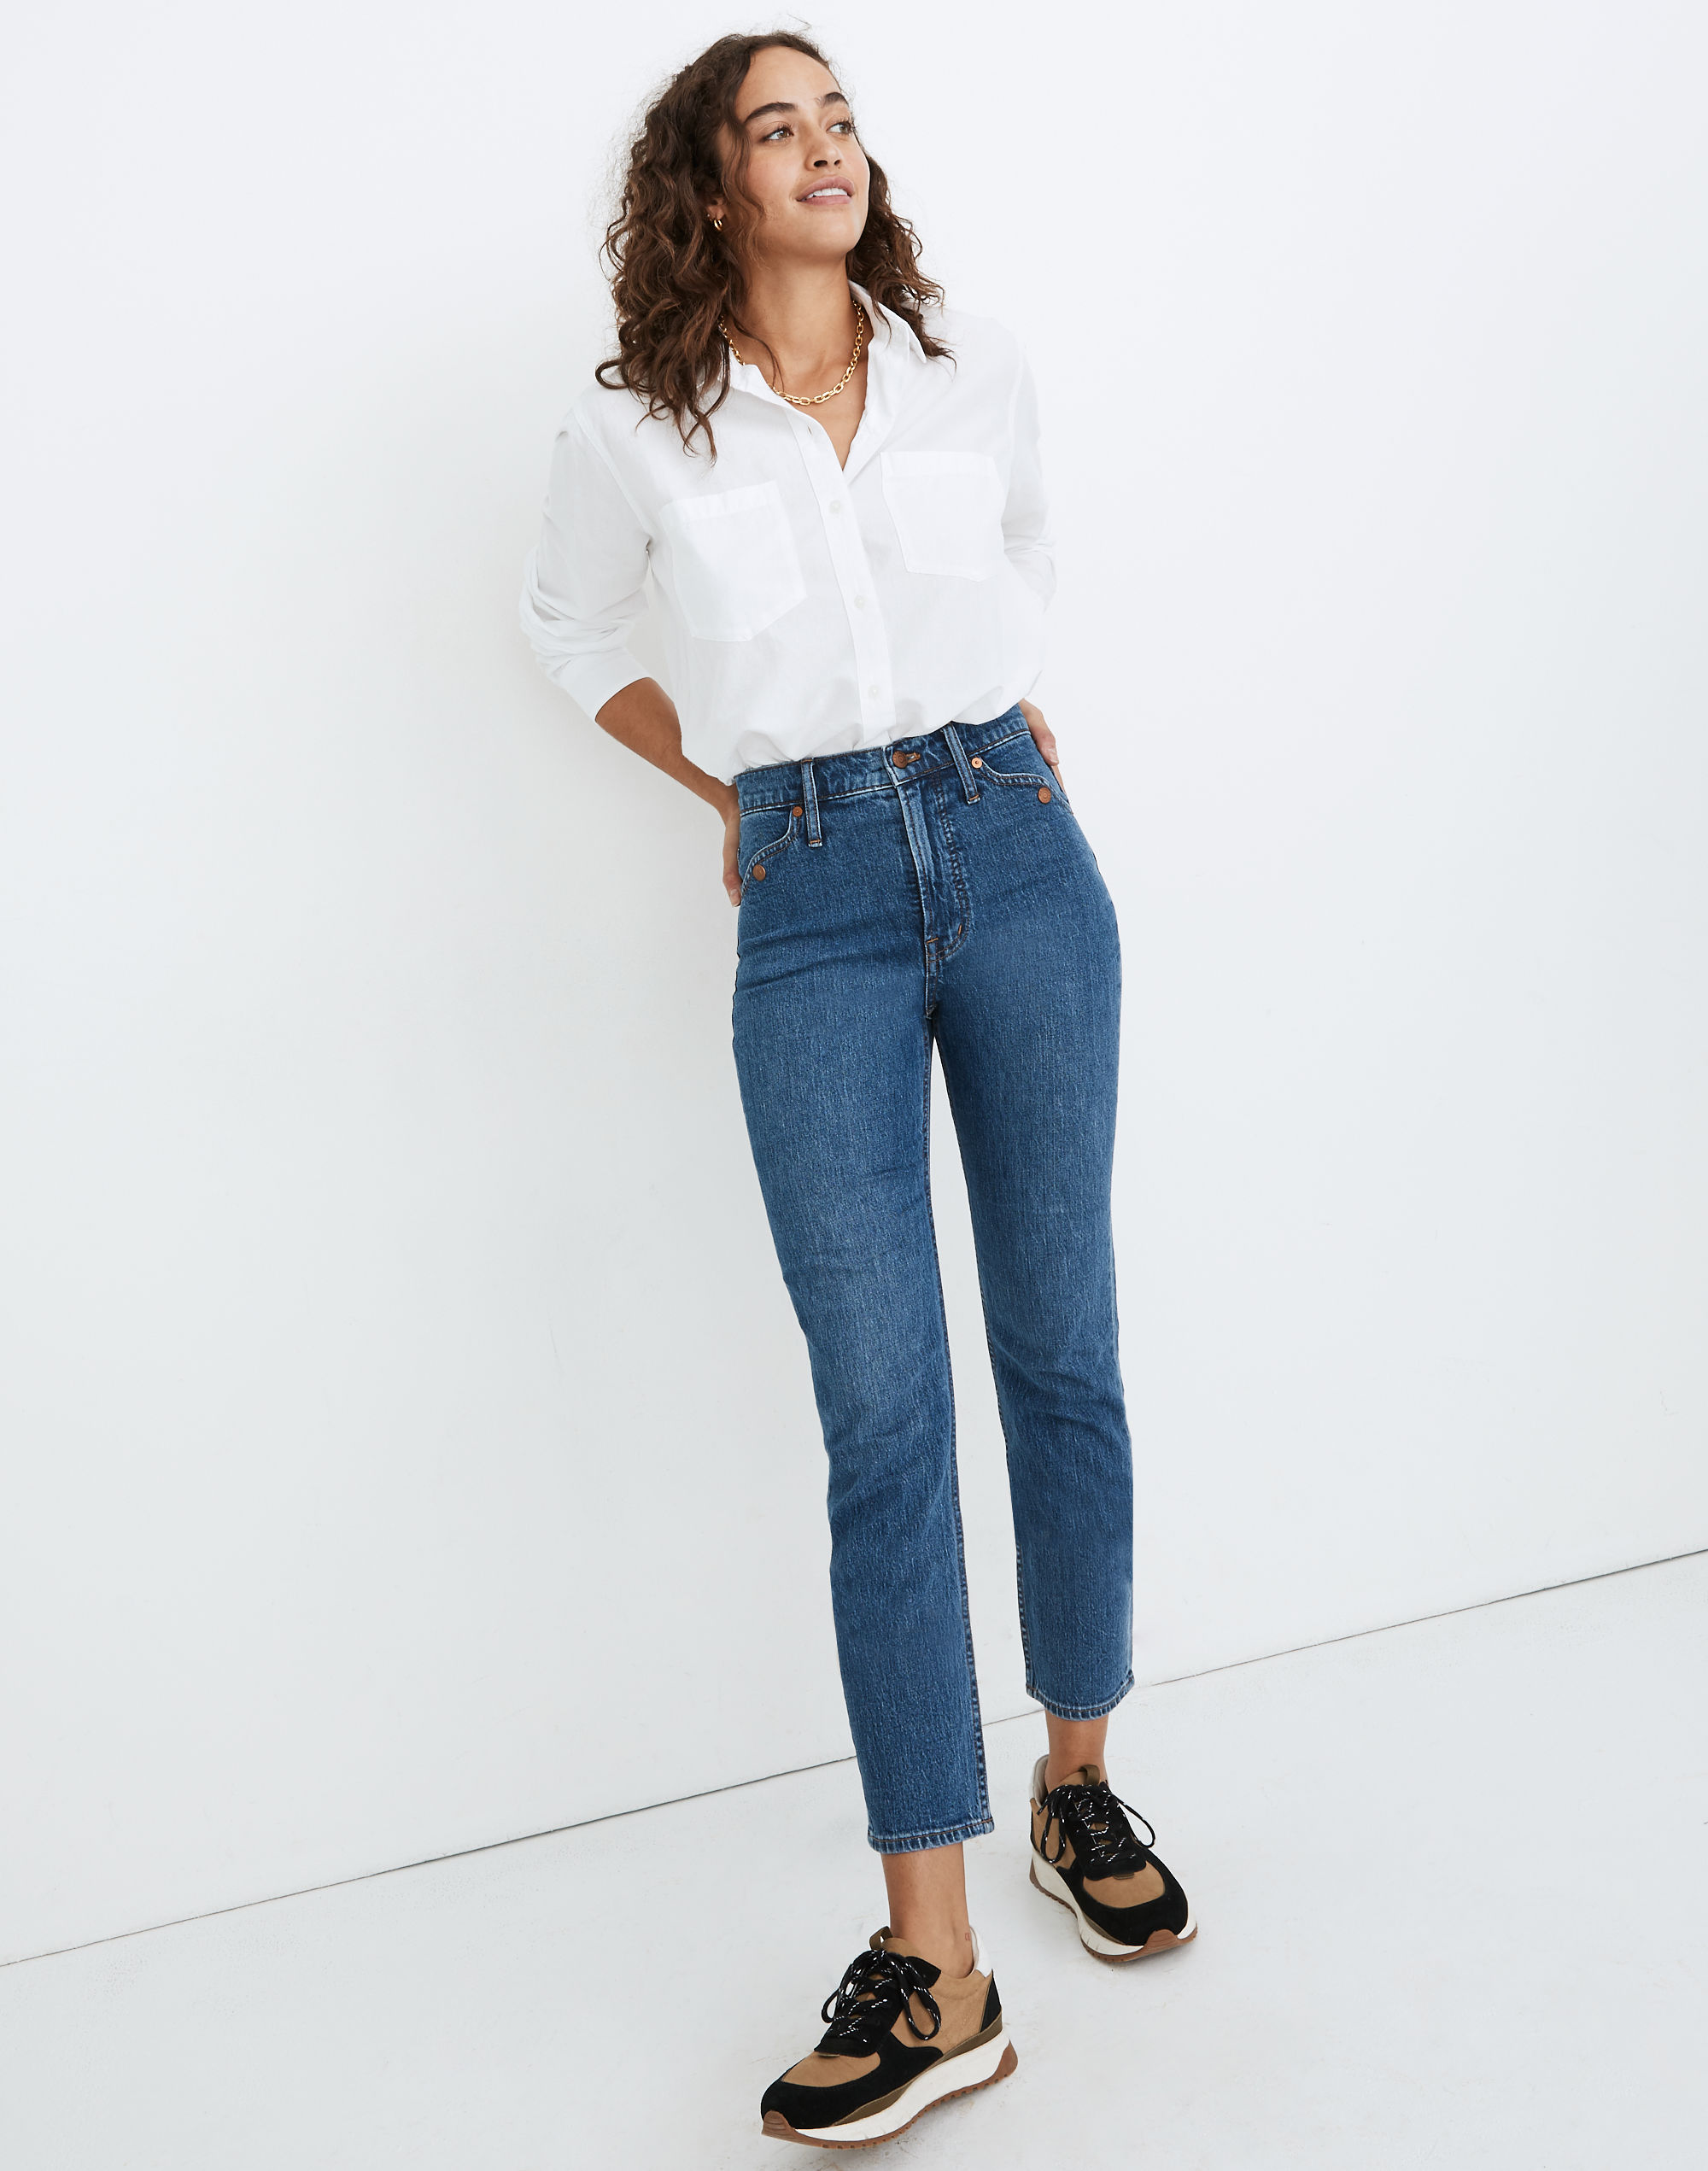 Women's Perfect Vintage Jean: Western Pocket Edition | Madewell